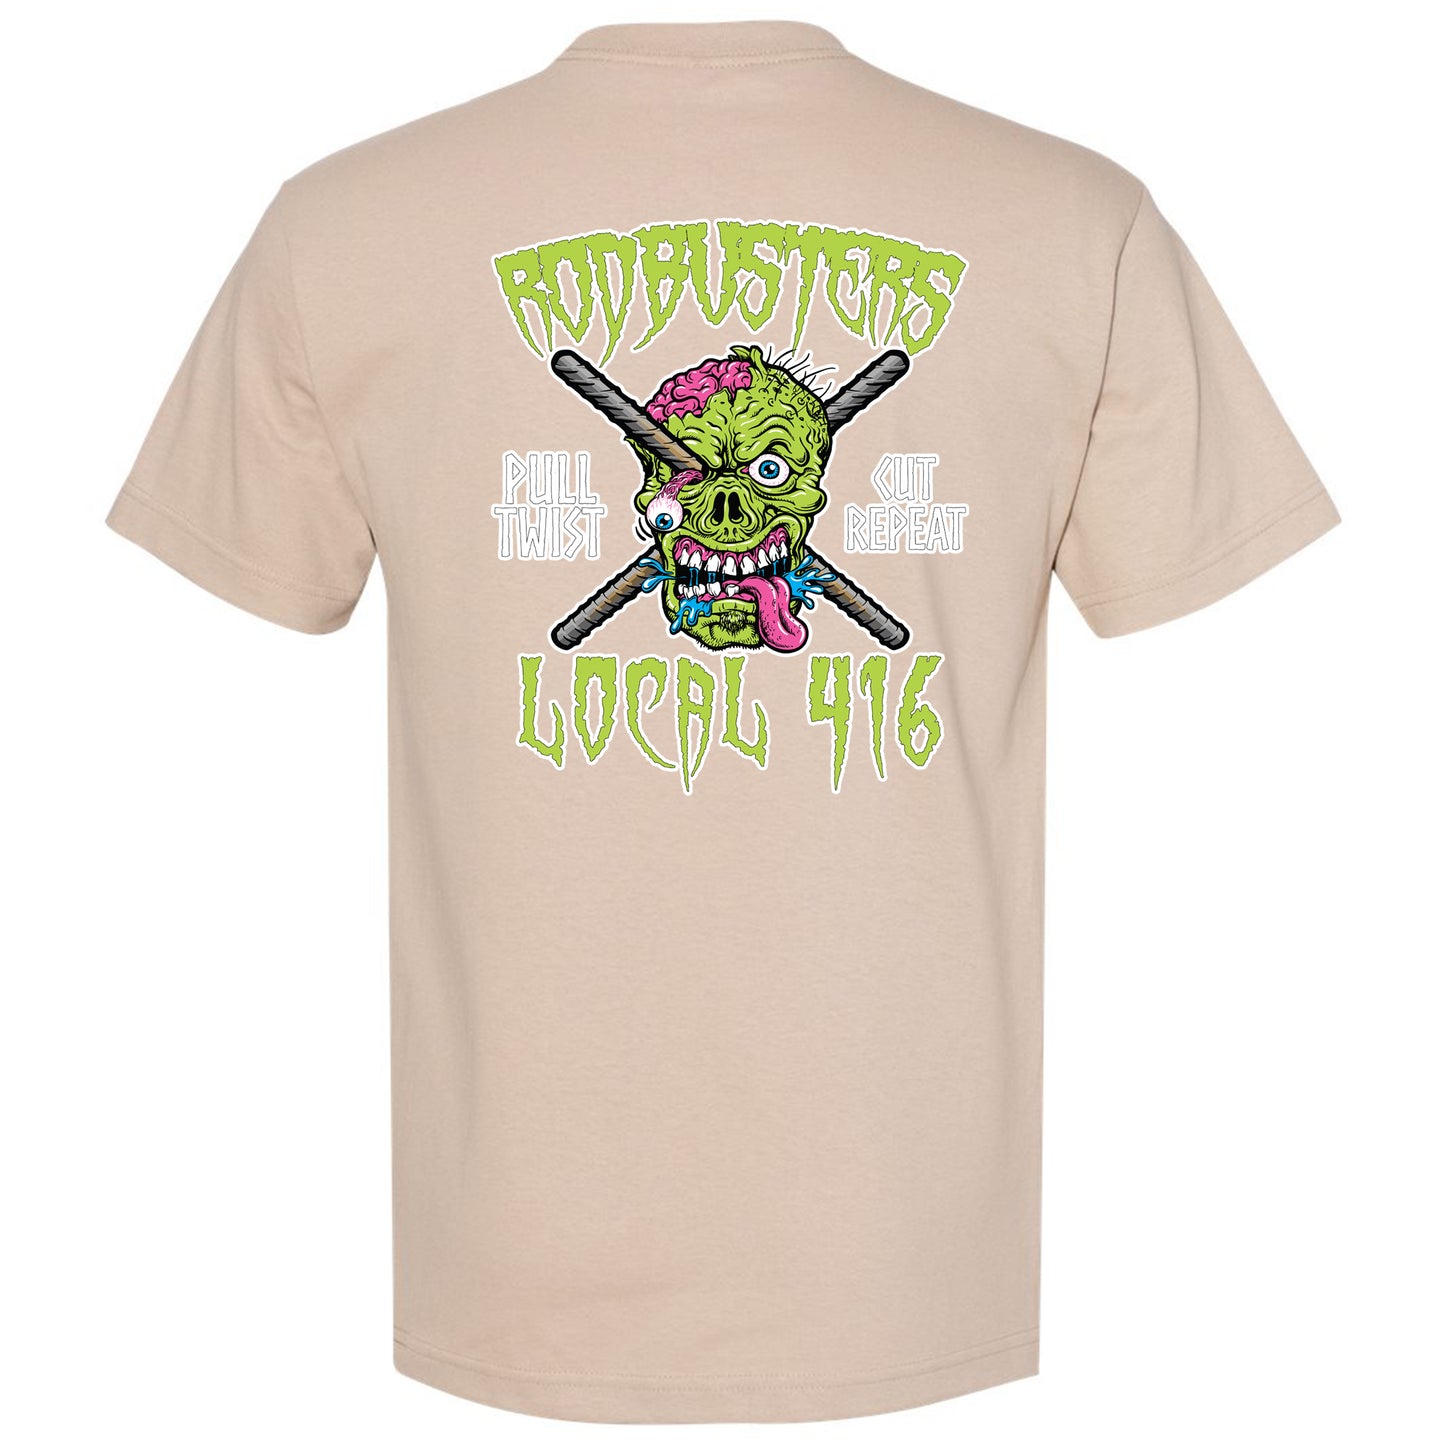 RODBUSTERS ZOMBIE 416 T-SHIRT